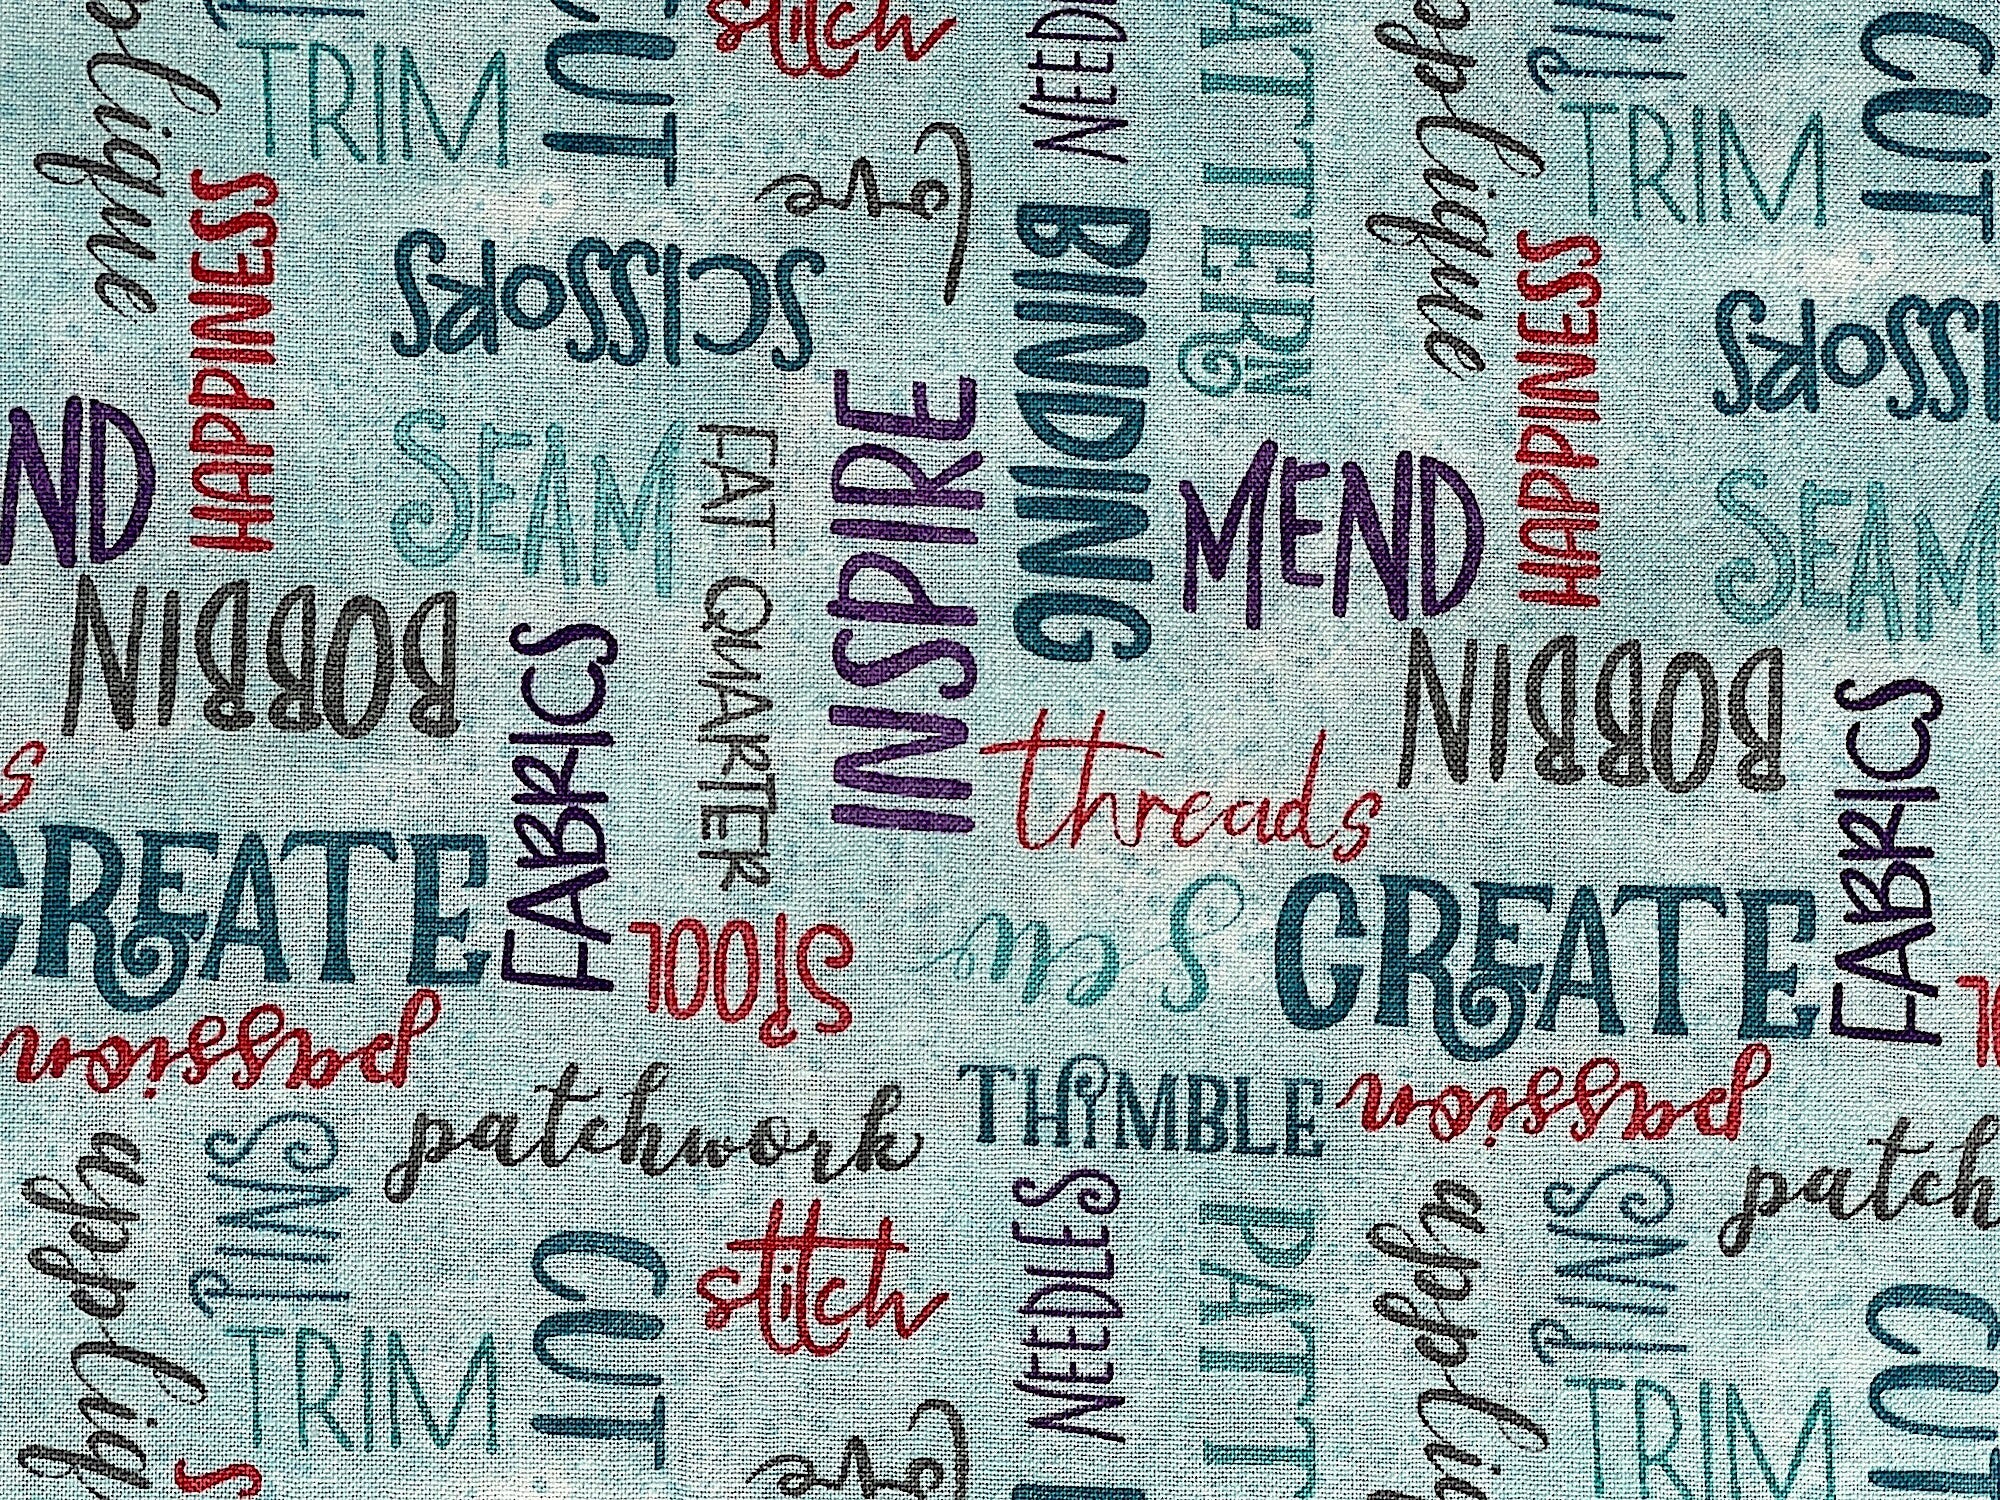 Close up of sayings such as inspire, create, mend, threads and more.